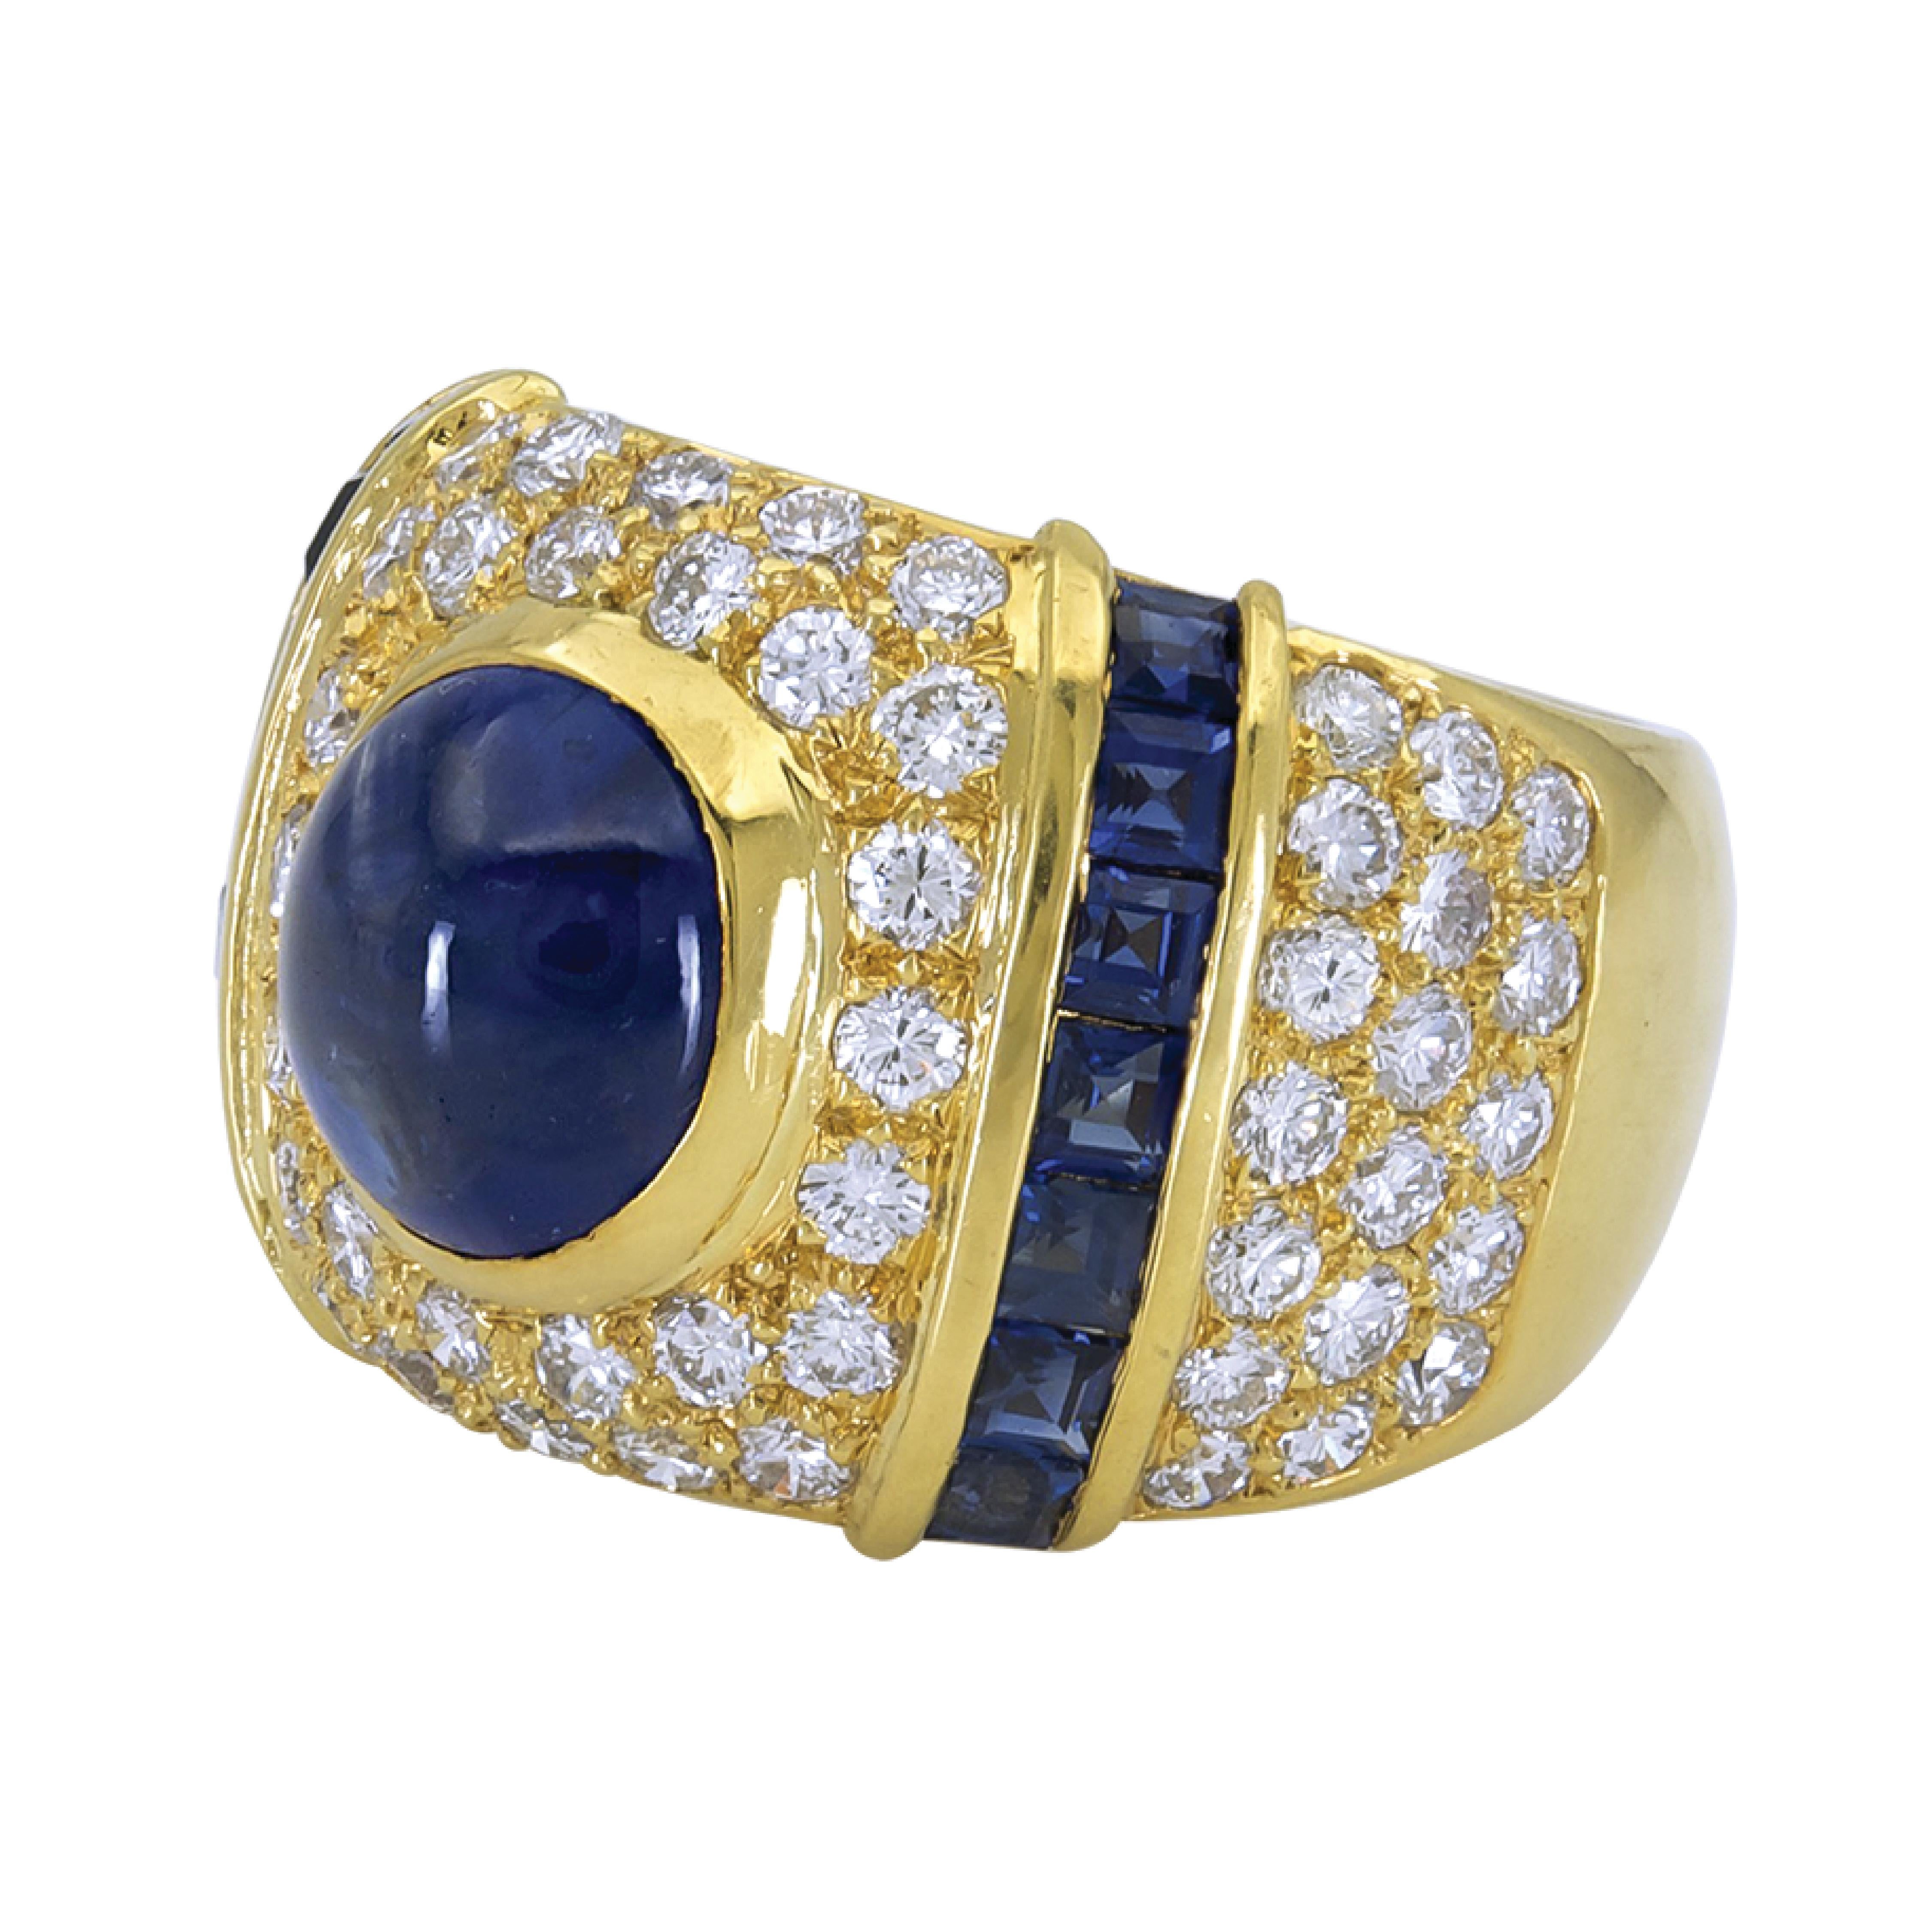 This dome ring features a center cabochon blue sapphire that weighs 5.67 carats and 1.88 carats of diamonds set in 18 karat yellow gold.

Sophia D by Joseph Dardashti LTD has been known worldwide for 35 years and are inspired by classic Art Deco